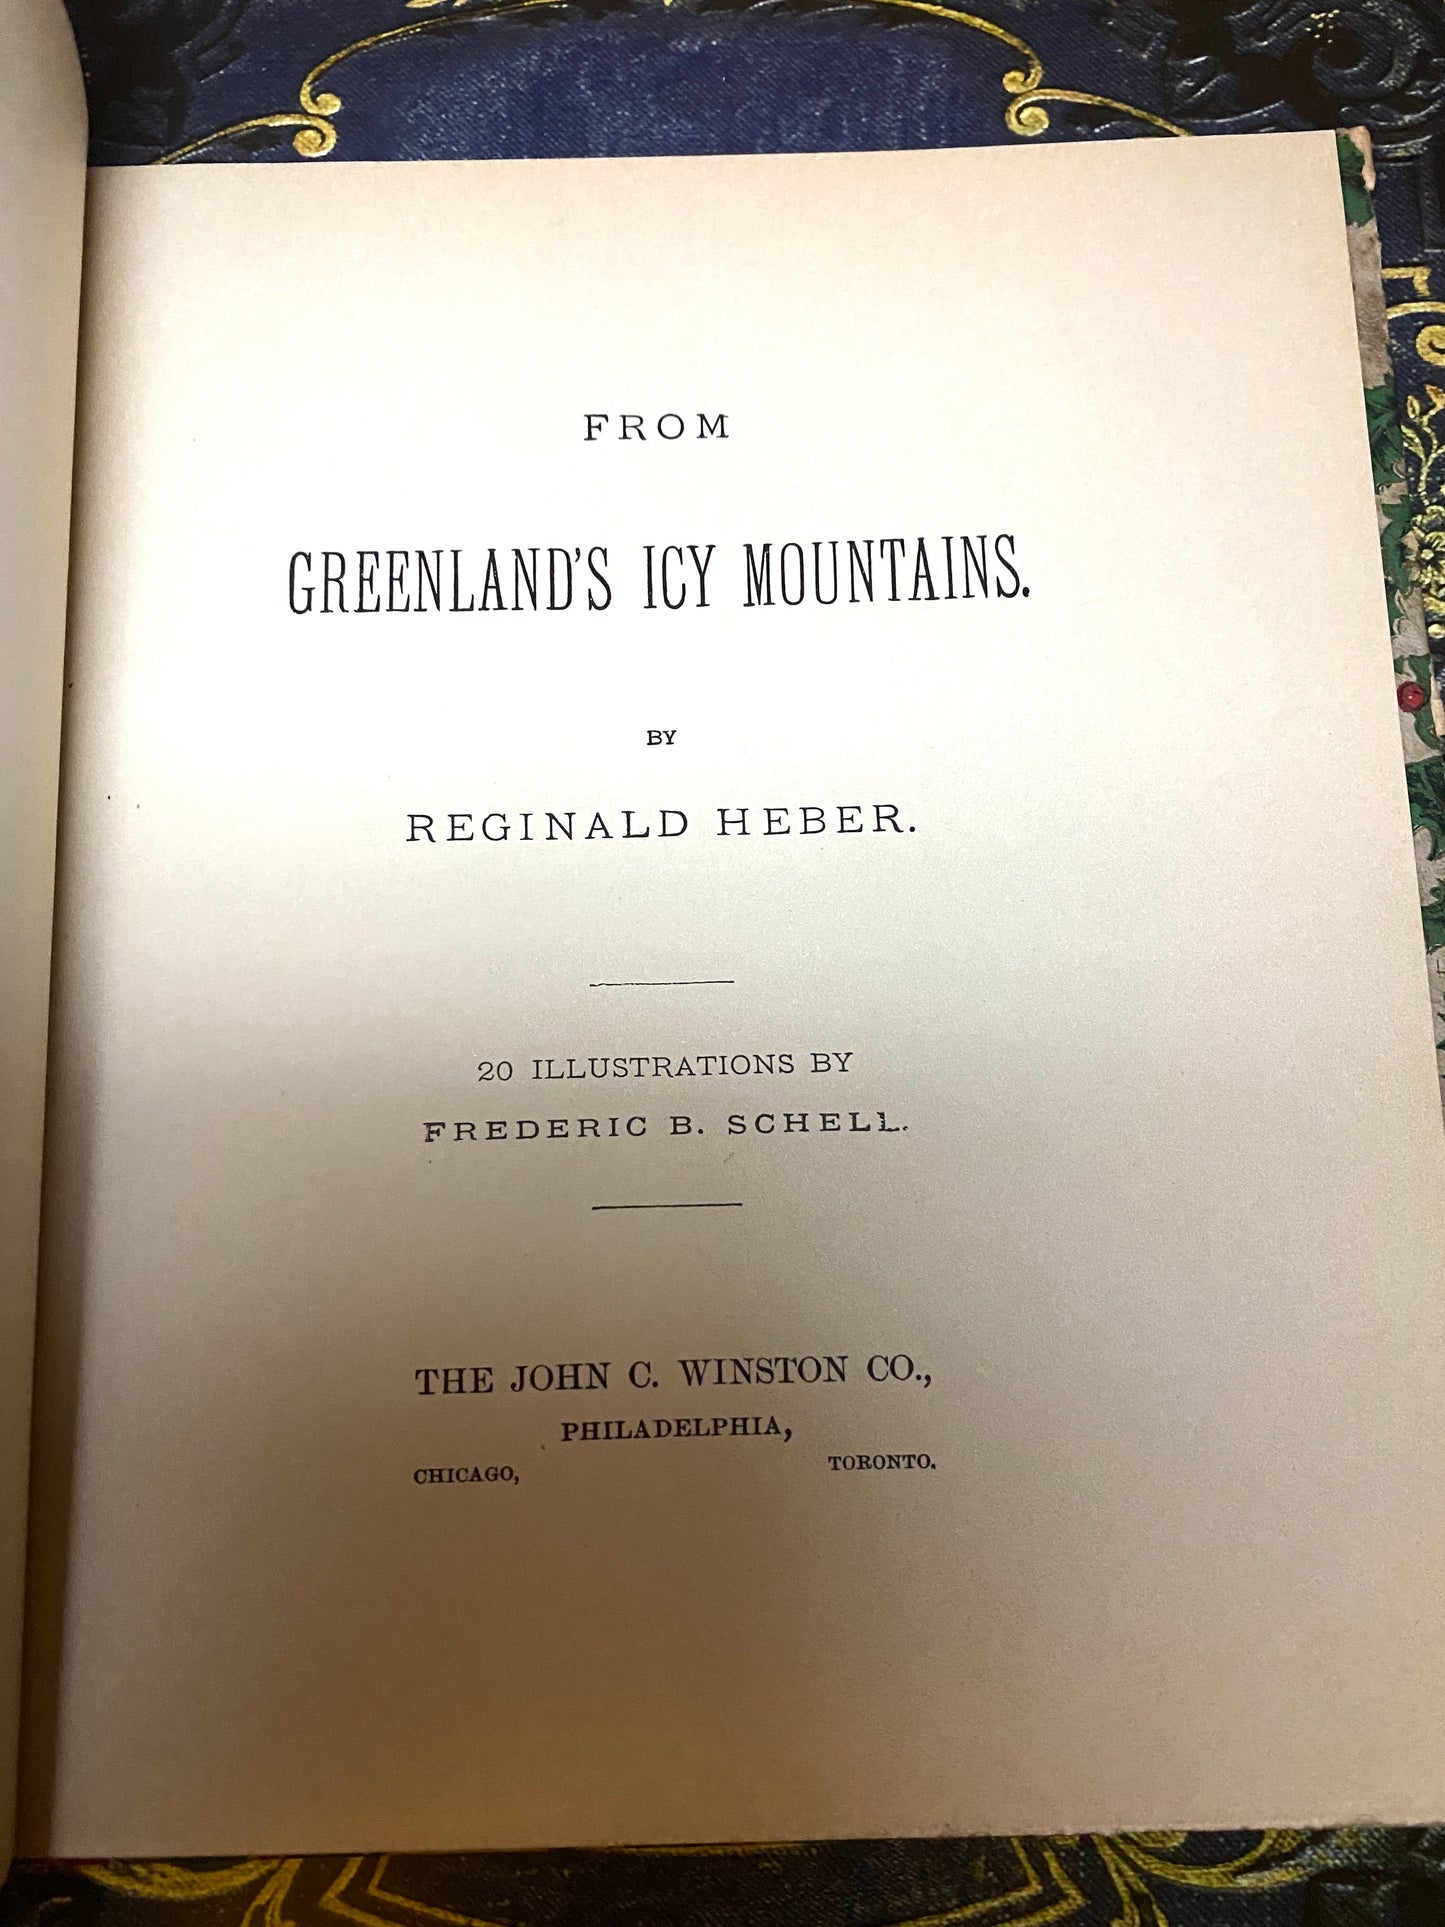 From Greenland's Icy Mountains by Reginald Heber. First Edition, 1884.